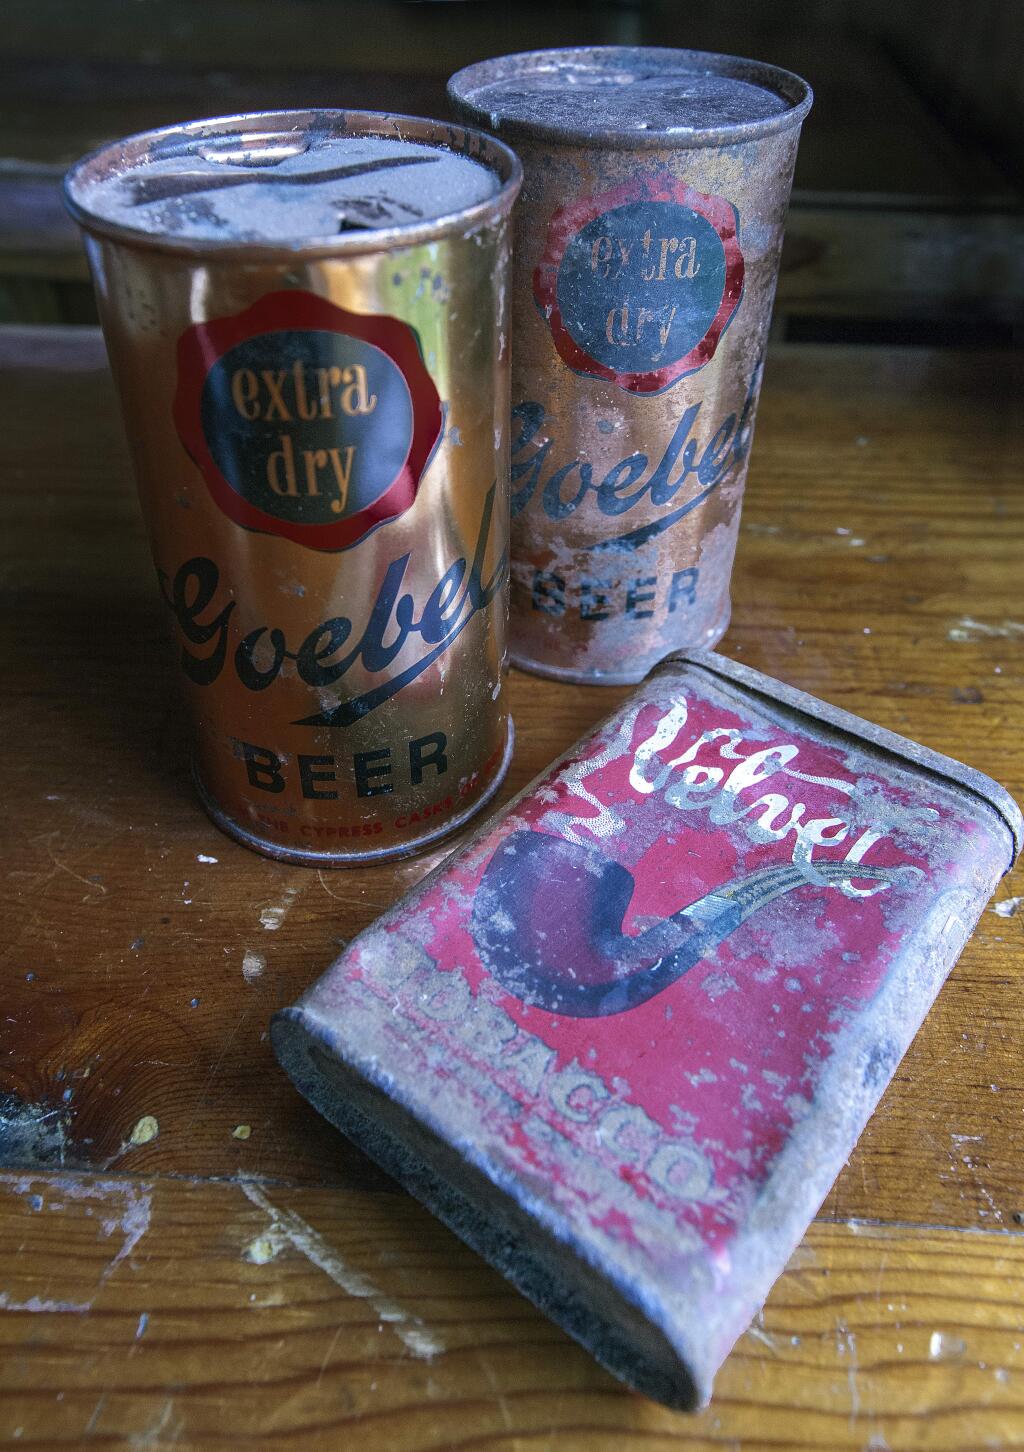 Robbi Pengelly/Index-TribuneWhile tearing out walls, workers found two empty cans of Goebels Beer and an empty container of Velvetpipe tobacco.